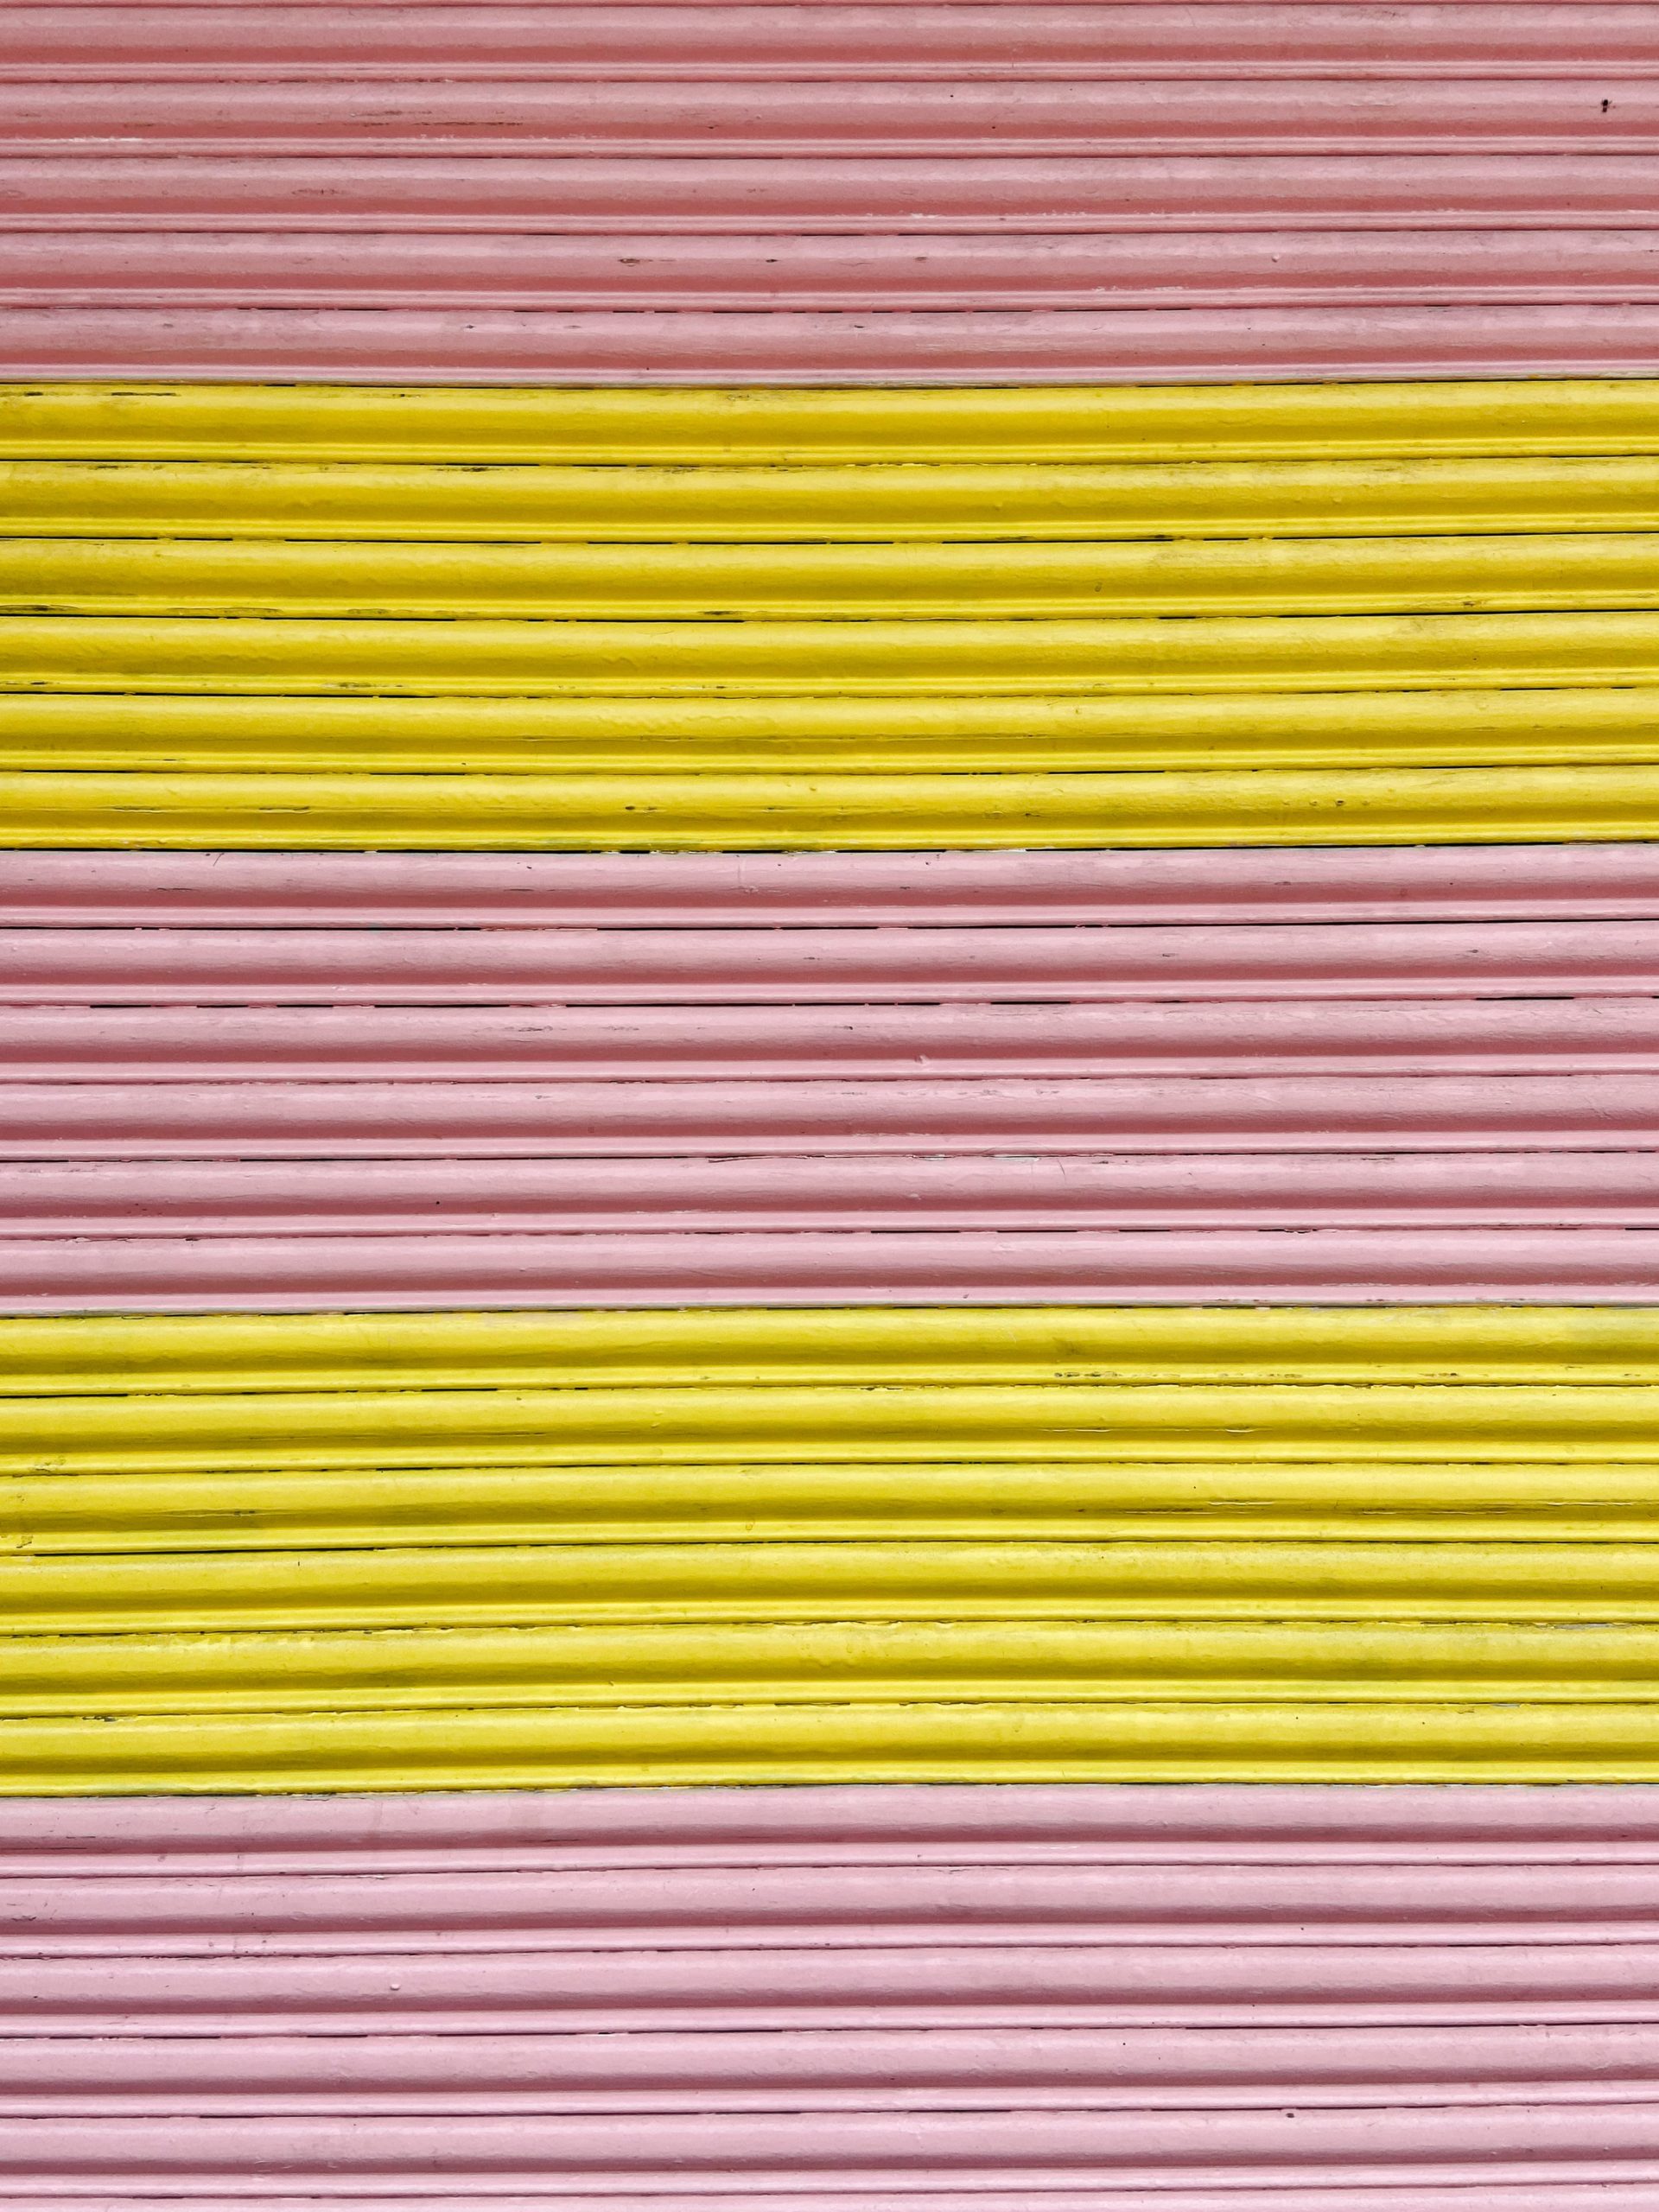 Close up photograph of the texture of a garage door that is painted in pink and yellow stripes